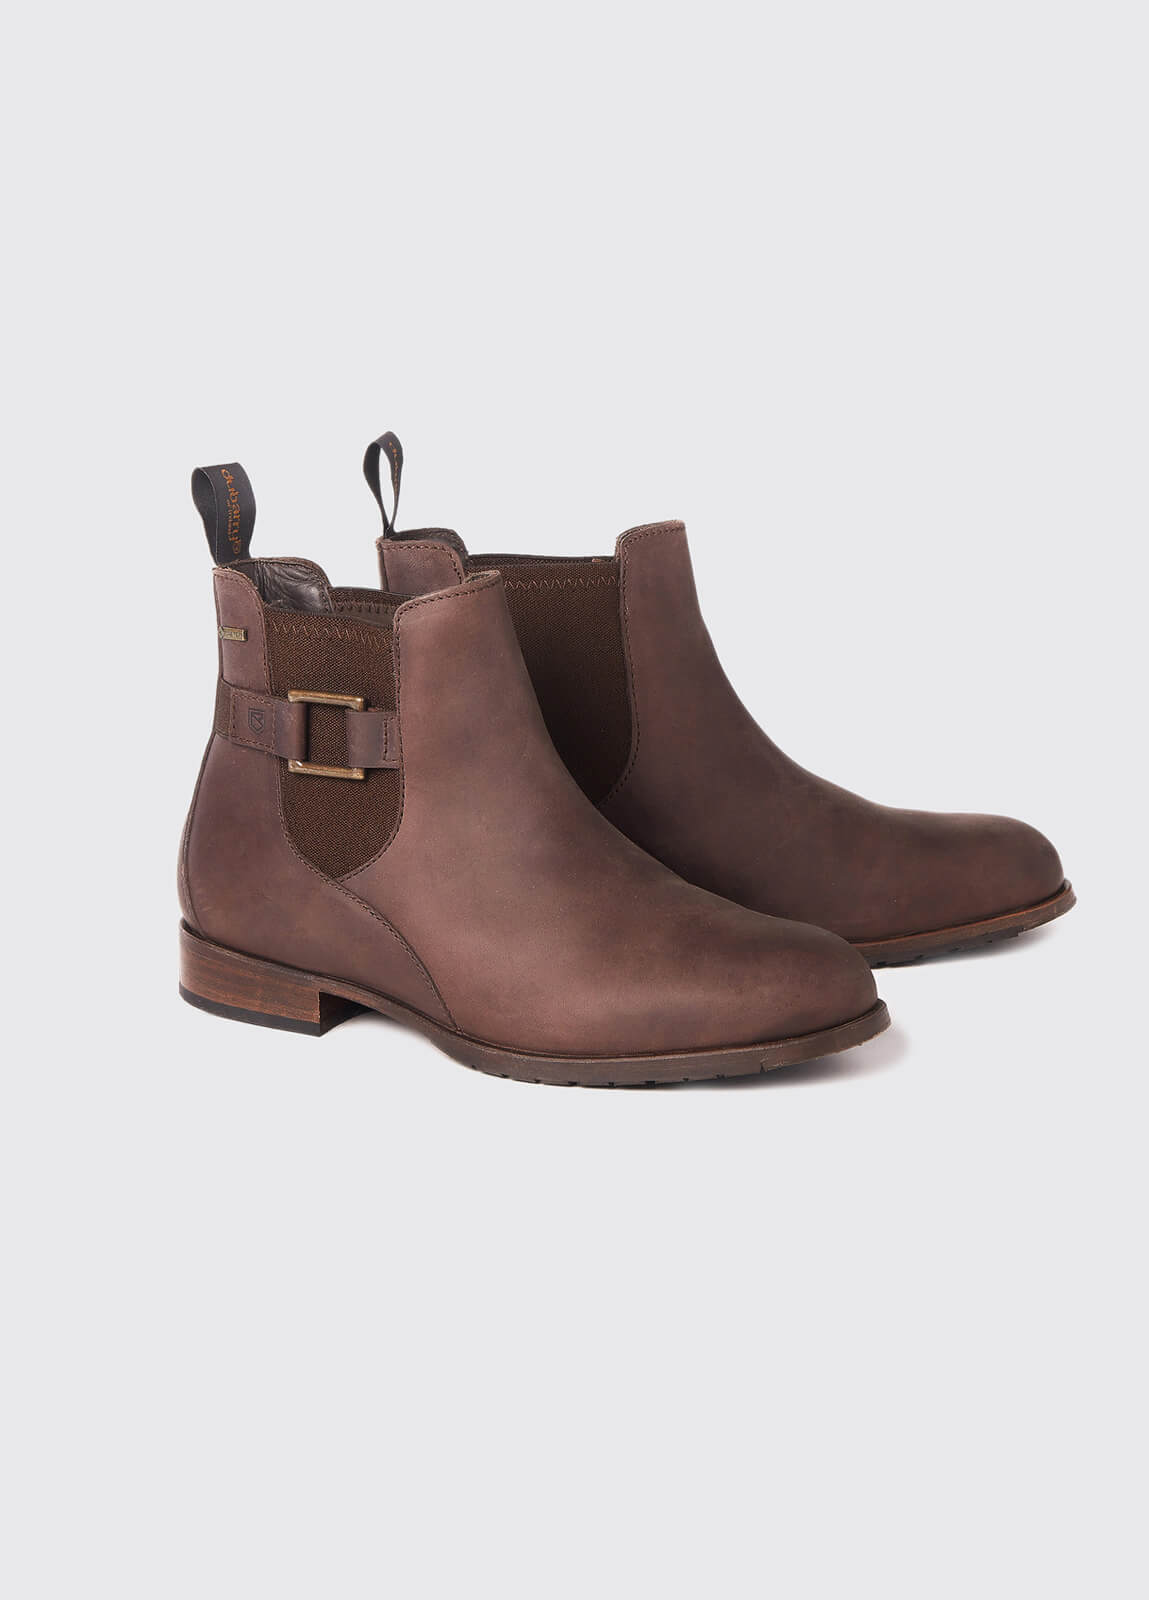 Monaghan Leather Soled Boot - Old Rum